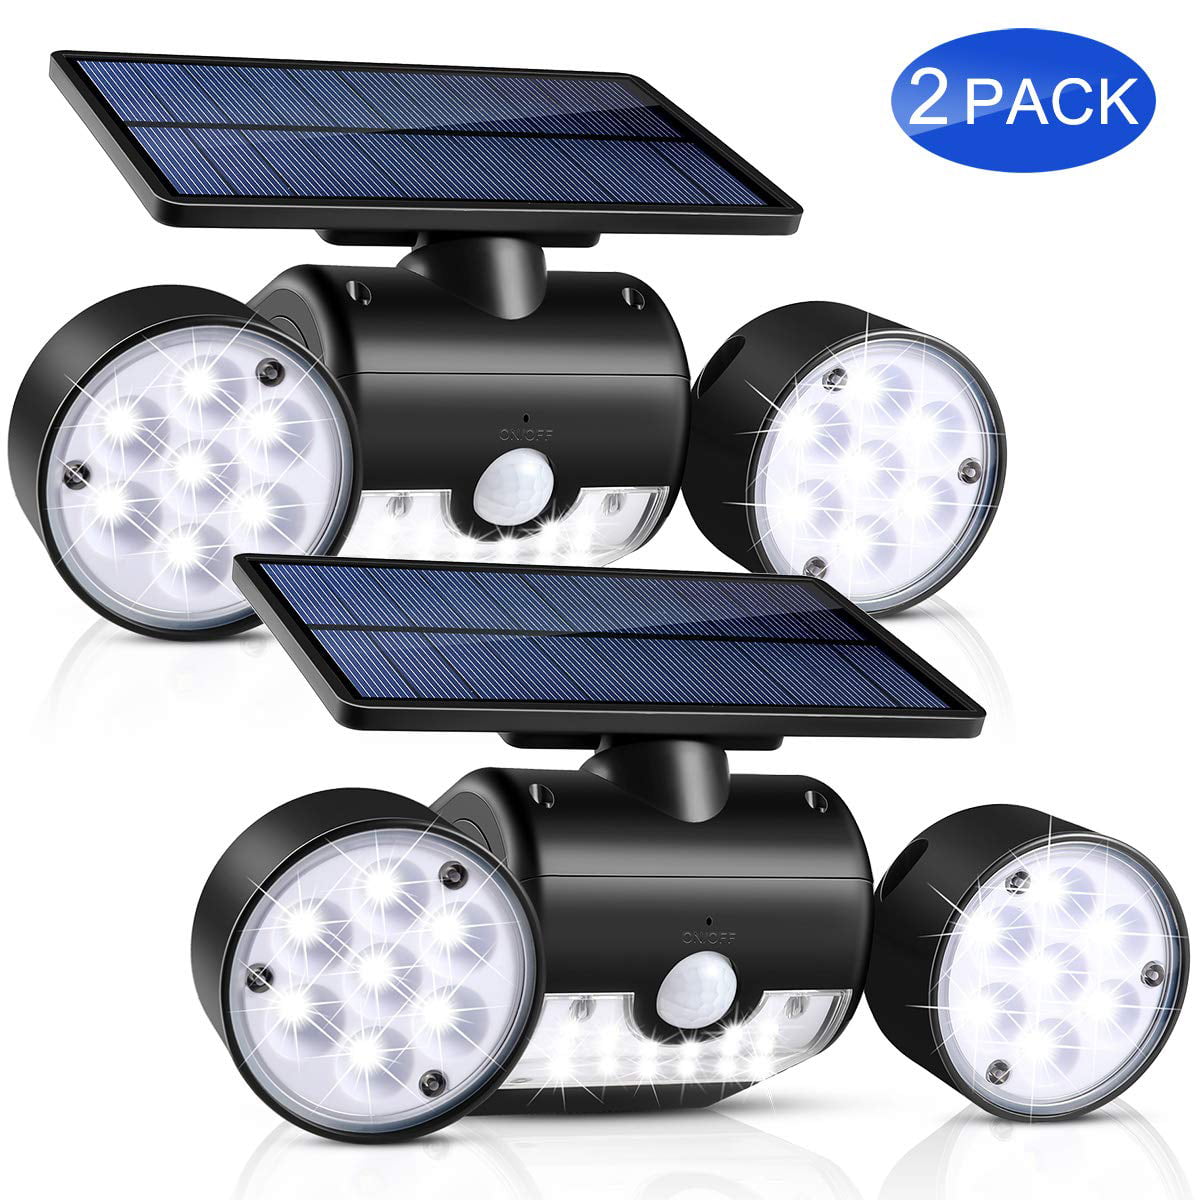 2pack 120 Led Solar outdoor motion sensor lights Solar Panel With Wide Angle